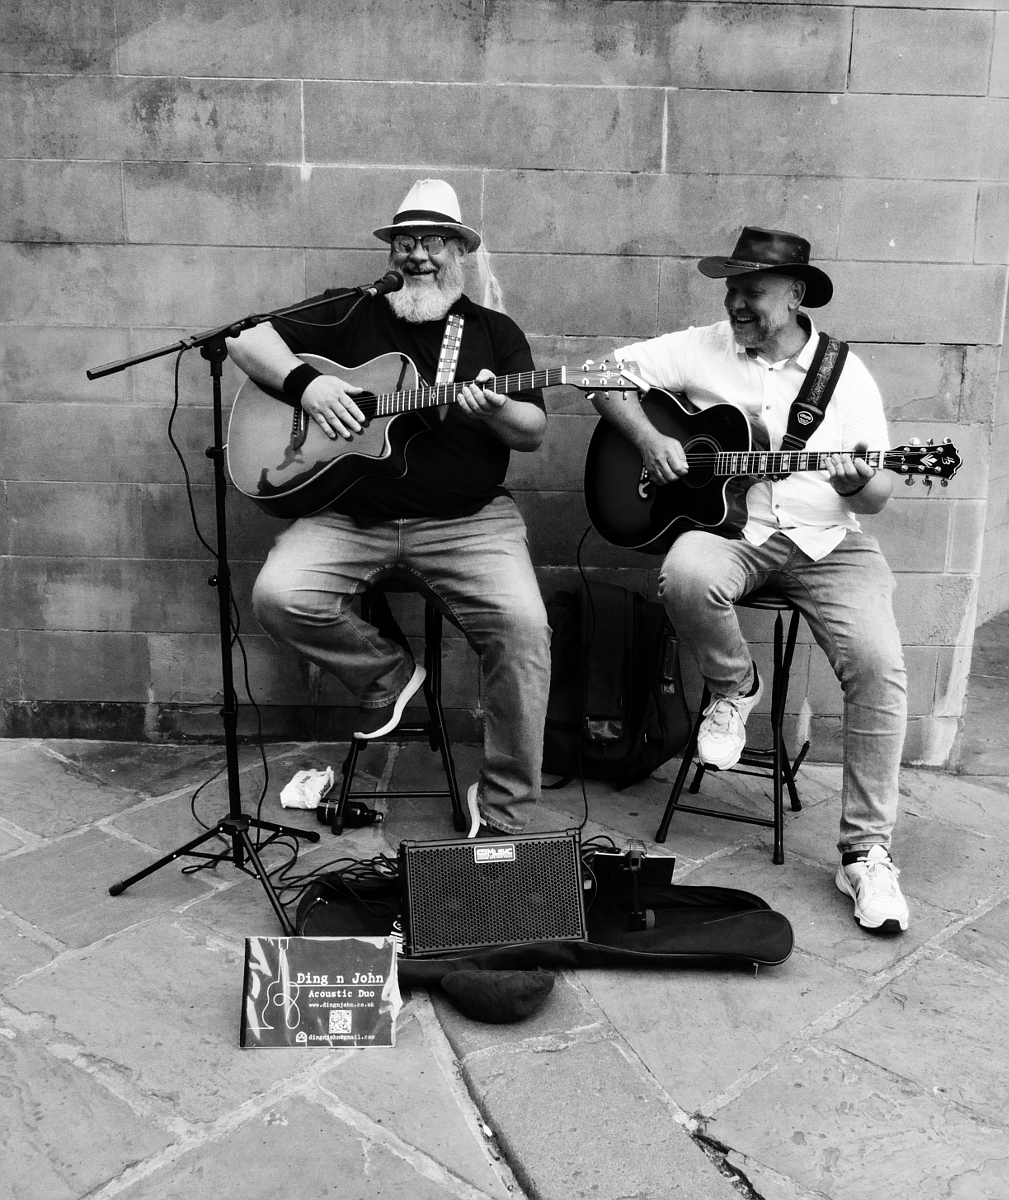 Derby: Busker - Guitar Duo. Photograph Copyright (c)2023 Paul Alan Grosse. All Rights Reserved.